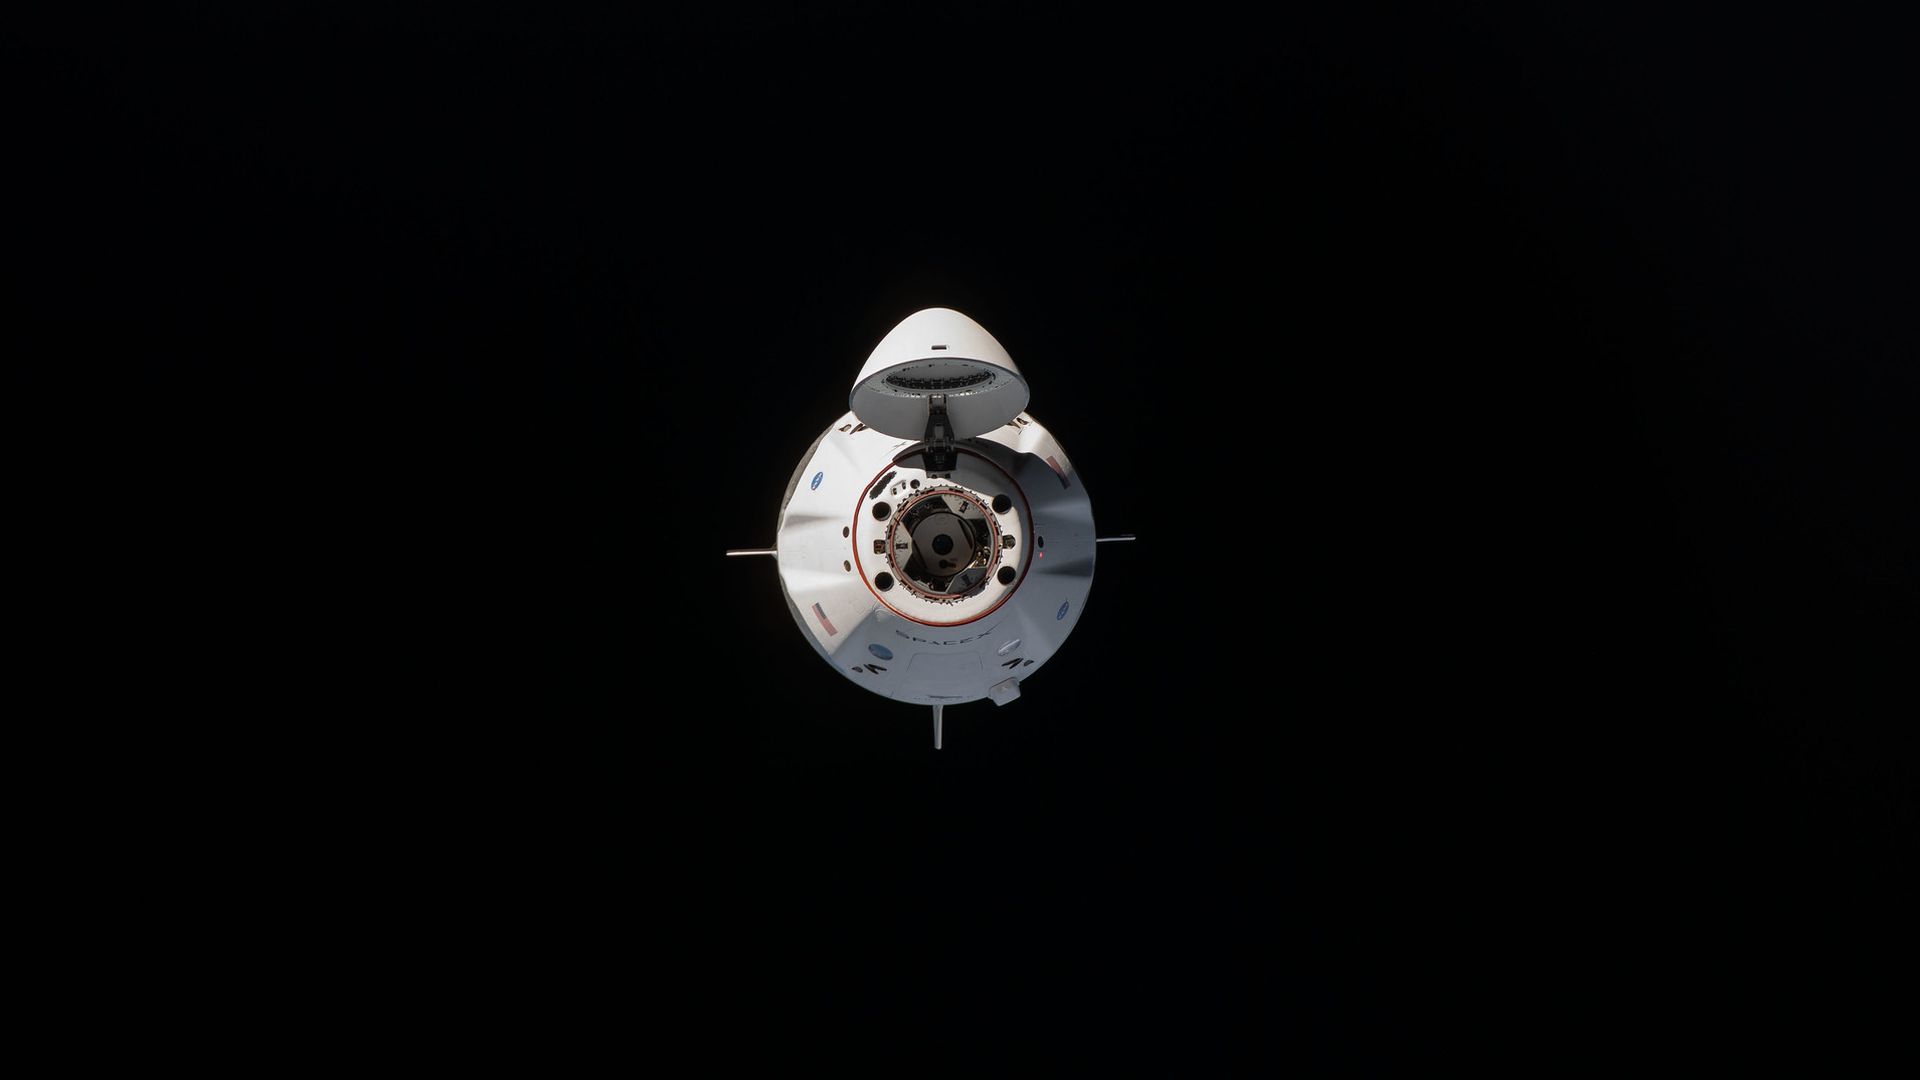 A SpaceX Crew Dragon approaching the International Space Station